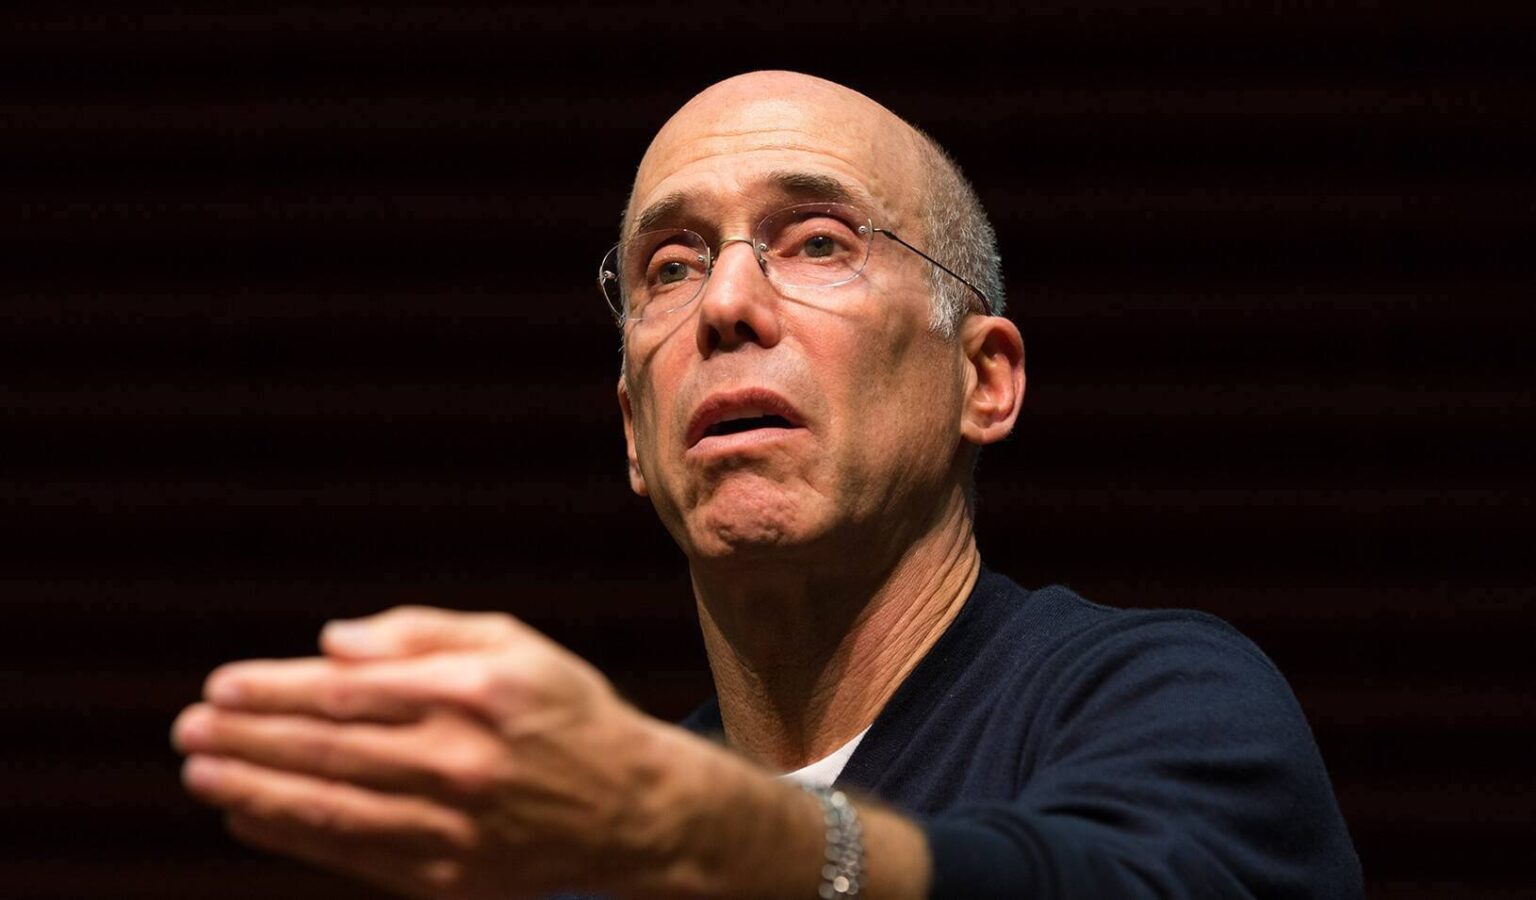 Jeffrey Katzenberg tried to launch the streaming site Quibi and failed pretty miserably. So why is Biden considering him for a government position?